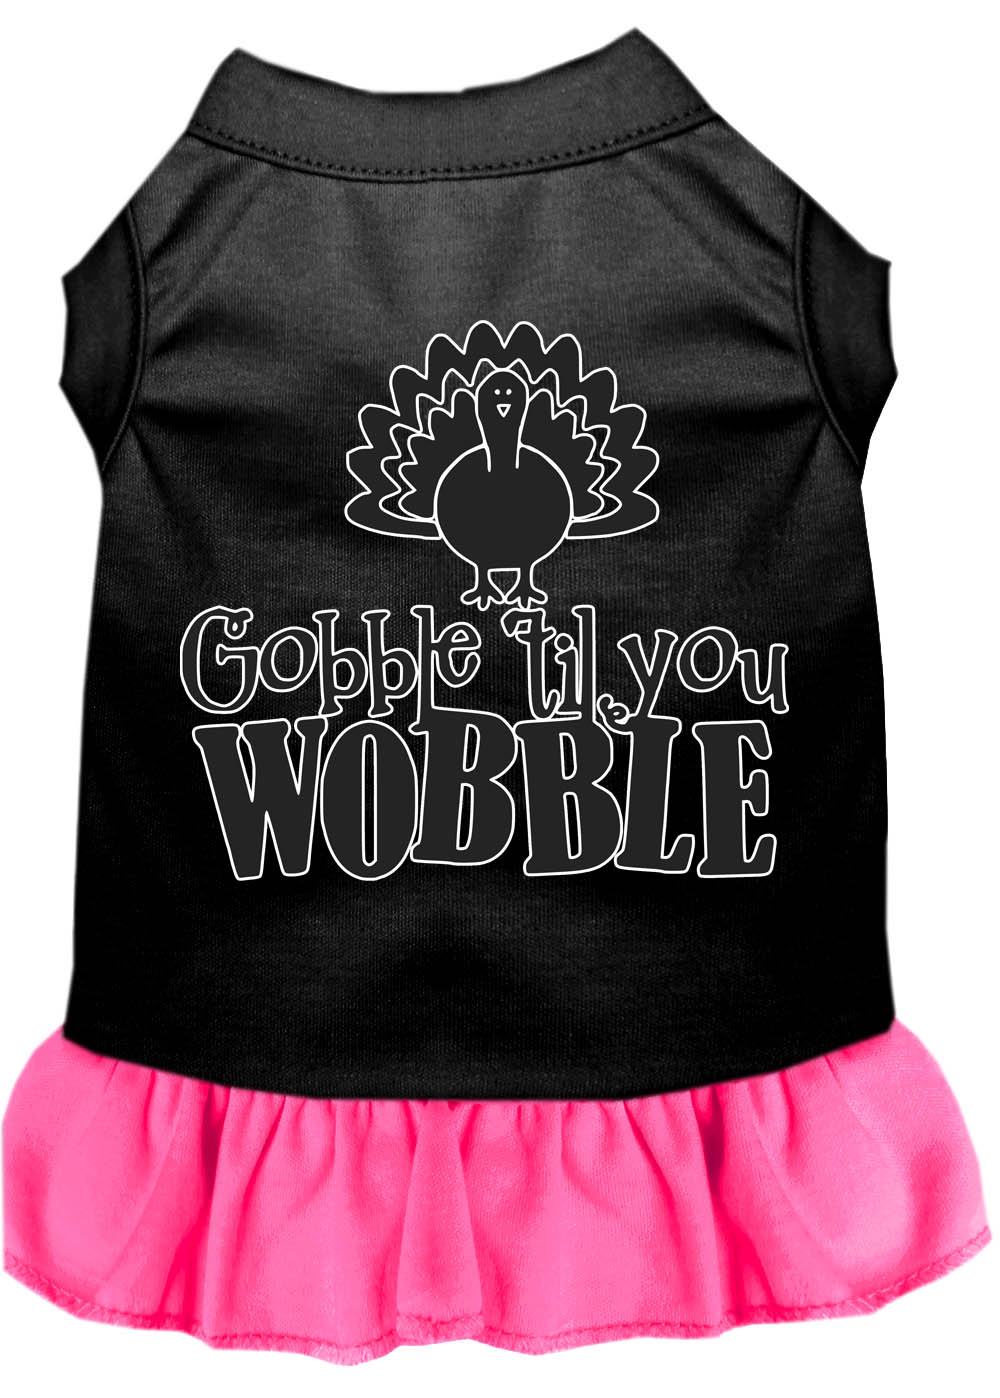 Gobble til You Wobble Screen Print Dog Dress Black with Bright Pink Med